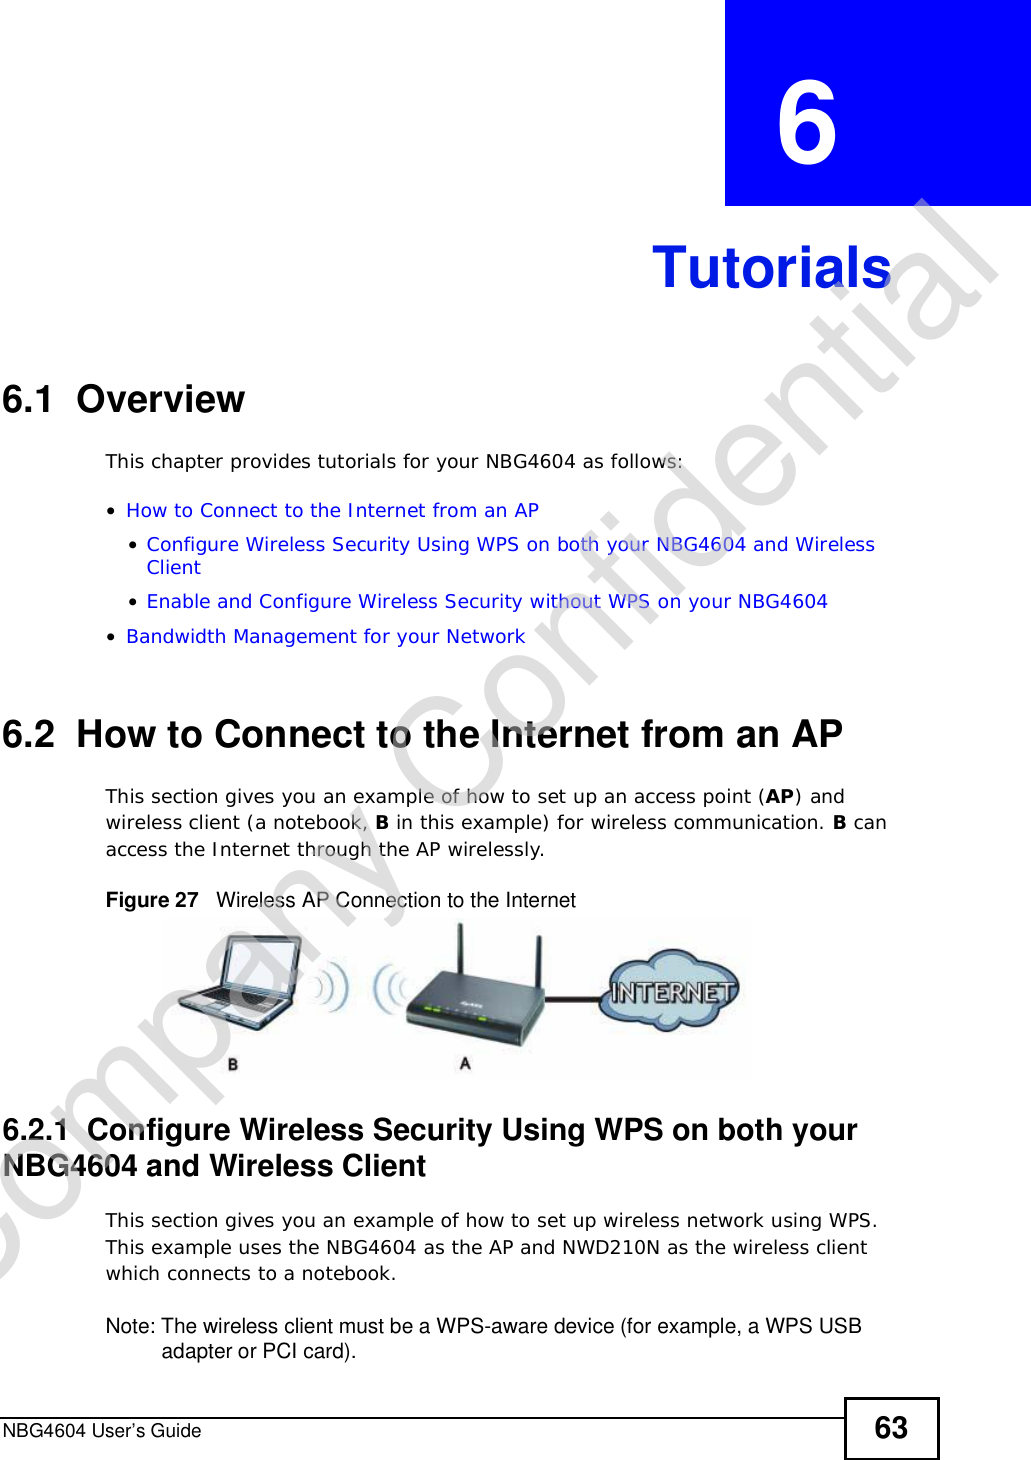 NBG4604 User’s Guide 63CHAPTER  6 Tutorials6.1  OverviewThis chapter provides tutorials for your NBG4604 as follows:•How to Connect to the Internet from an AP•Configure Wireless Security Using WPS on both your NBG4604 and Wireless Client•Enable and Configure Wireless Security without WPS on your NBG4604•Bandwidth Management for your Network6.2  How to Connect to the Internet from an APThis section gives you an example of how to set up an access point (AP) and wireless client (a notebook, B in this example) for wireless communication. B can access the Internet through the AP wirelessly.Figure 27   Wireless AP Connection to the Internet6.2.1  Configure Wireless Security Using WPS on both your NBG4604 and Wireless ClientThis section gives you an example of how to set up wireless network using WPS. This example uses the NBG4604 as the AP and NWD210N as the wireless client which connects to a notebook. Note: The wireless client must be a WPS-aware device (for example, a WPS USB adapter or PCI card).Company Confidential